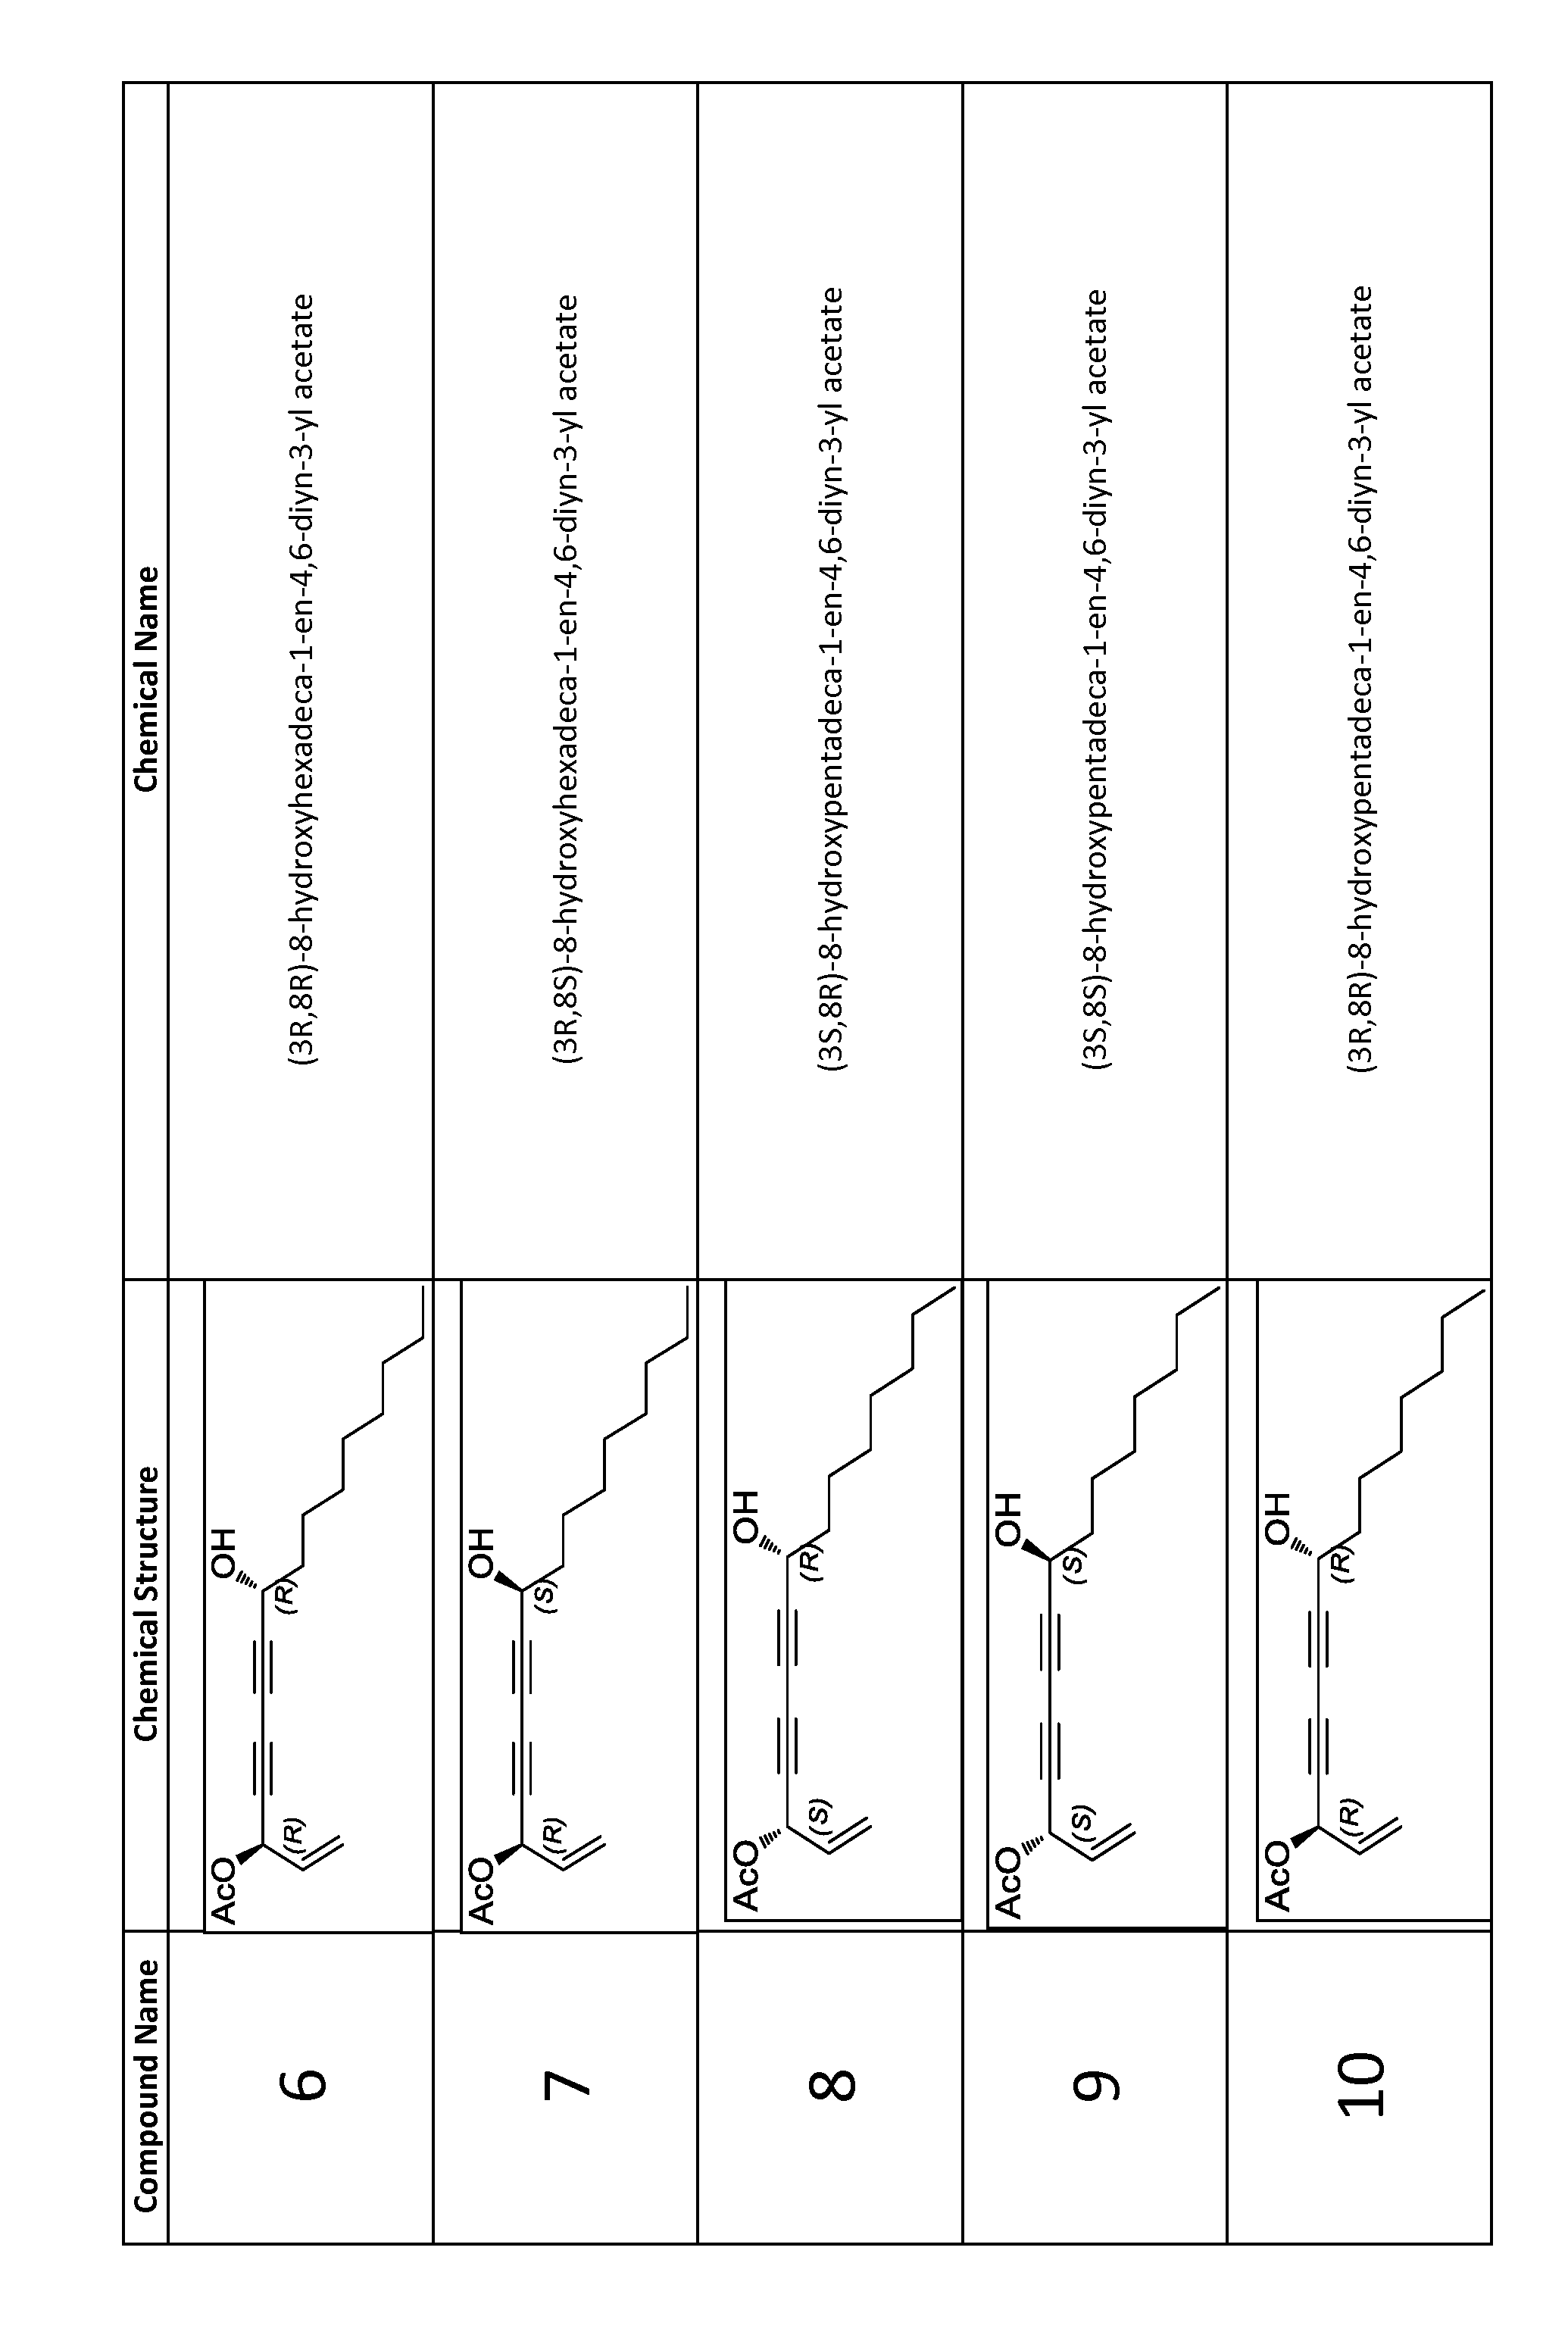 Therapeutic Compounds for Protozoal and Microbial Infections and Cancer